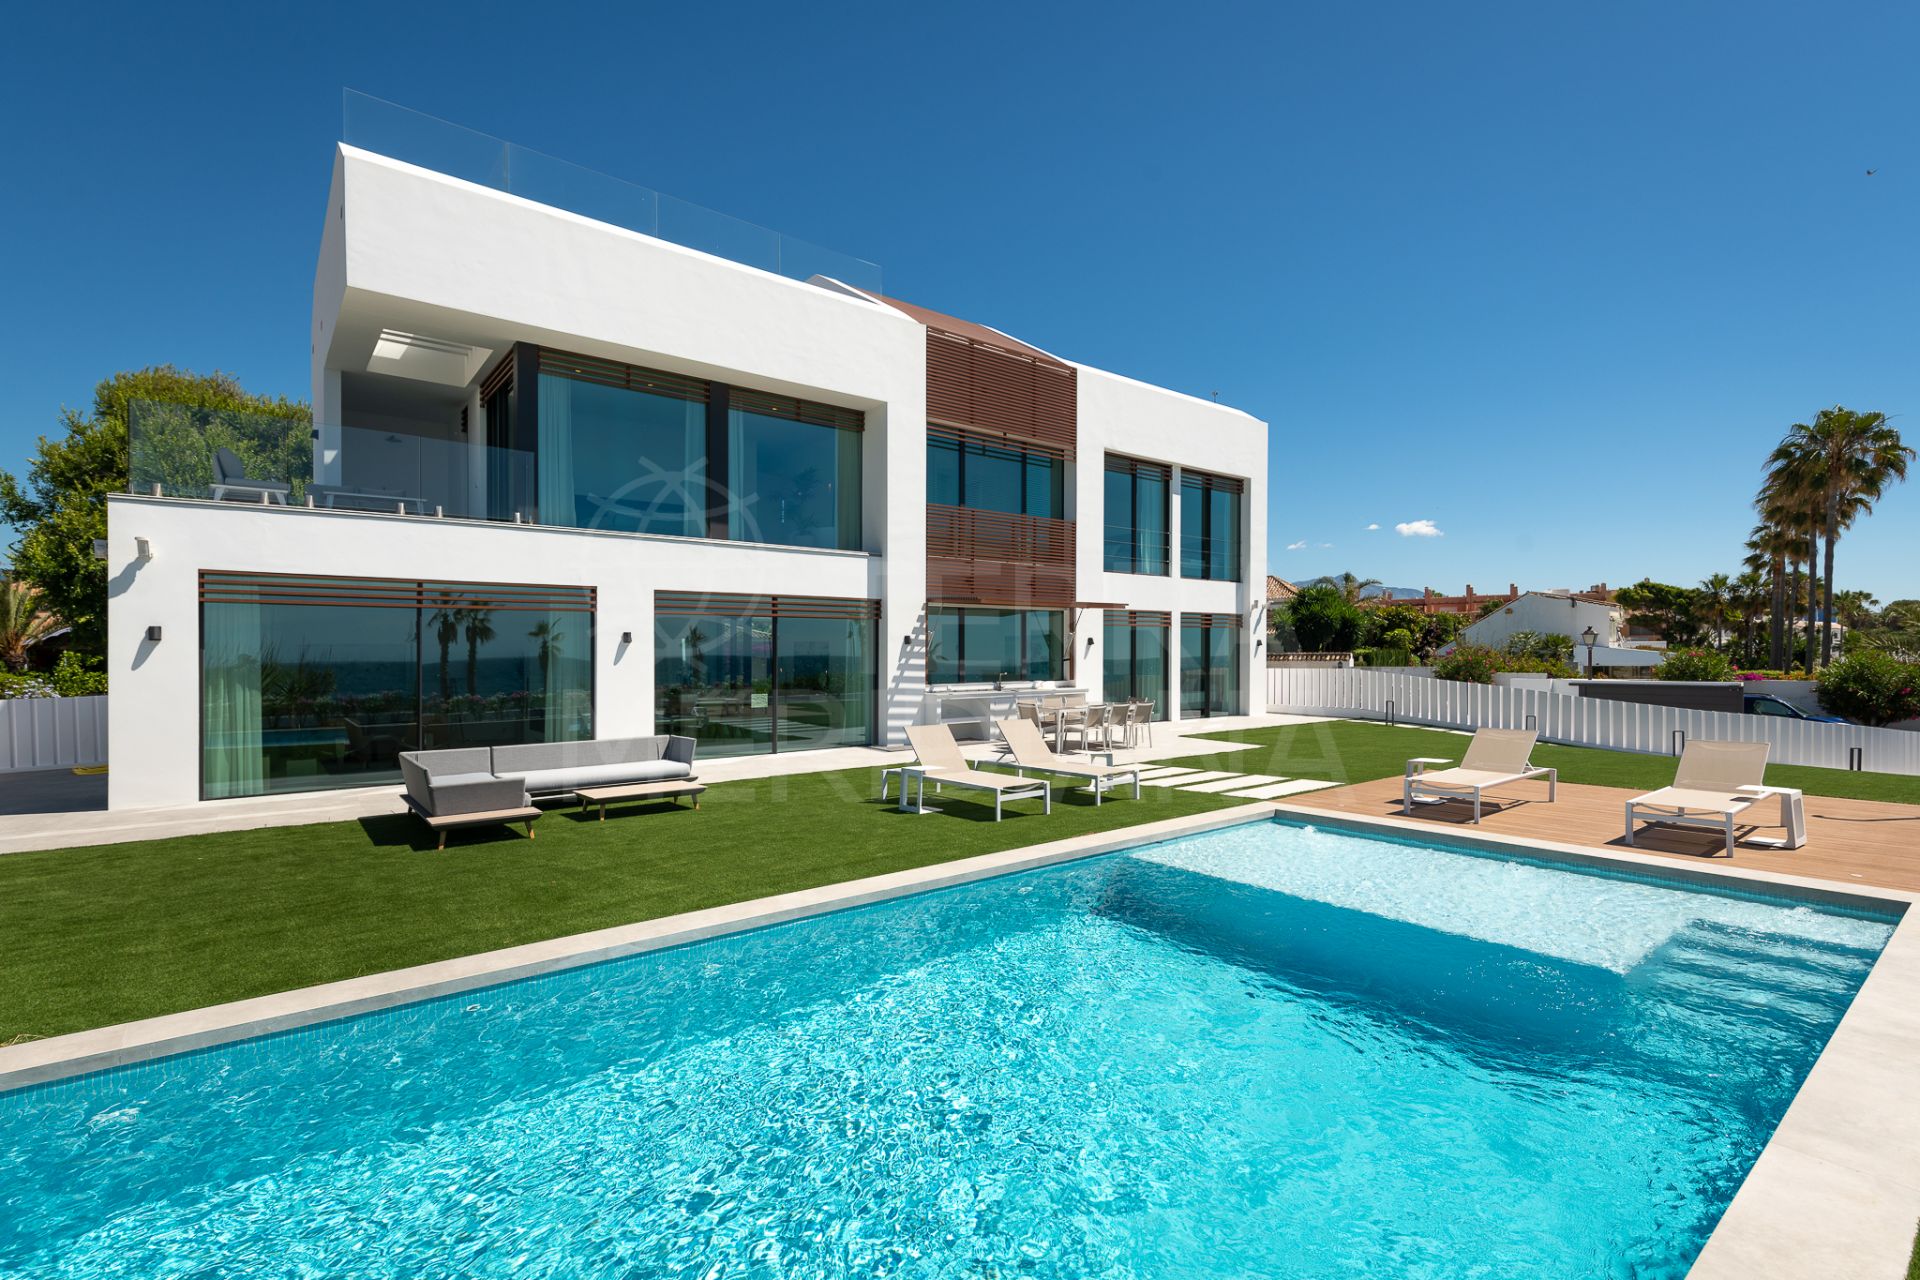 Superb front line beach villa with 5 bedrooms for sale in the New Golden Mile of Estepona